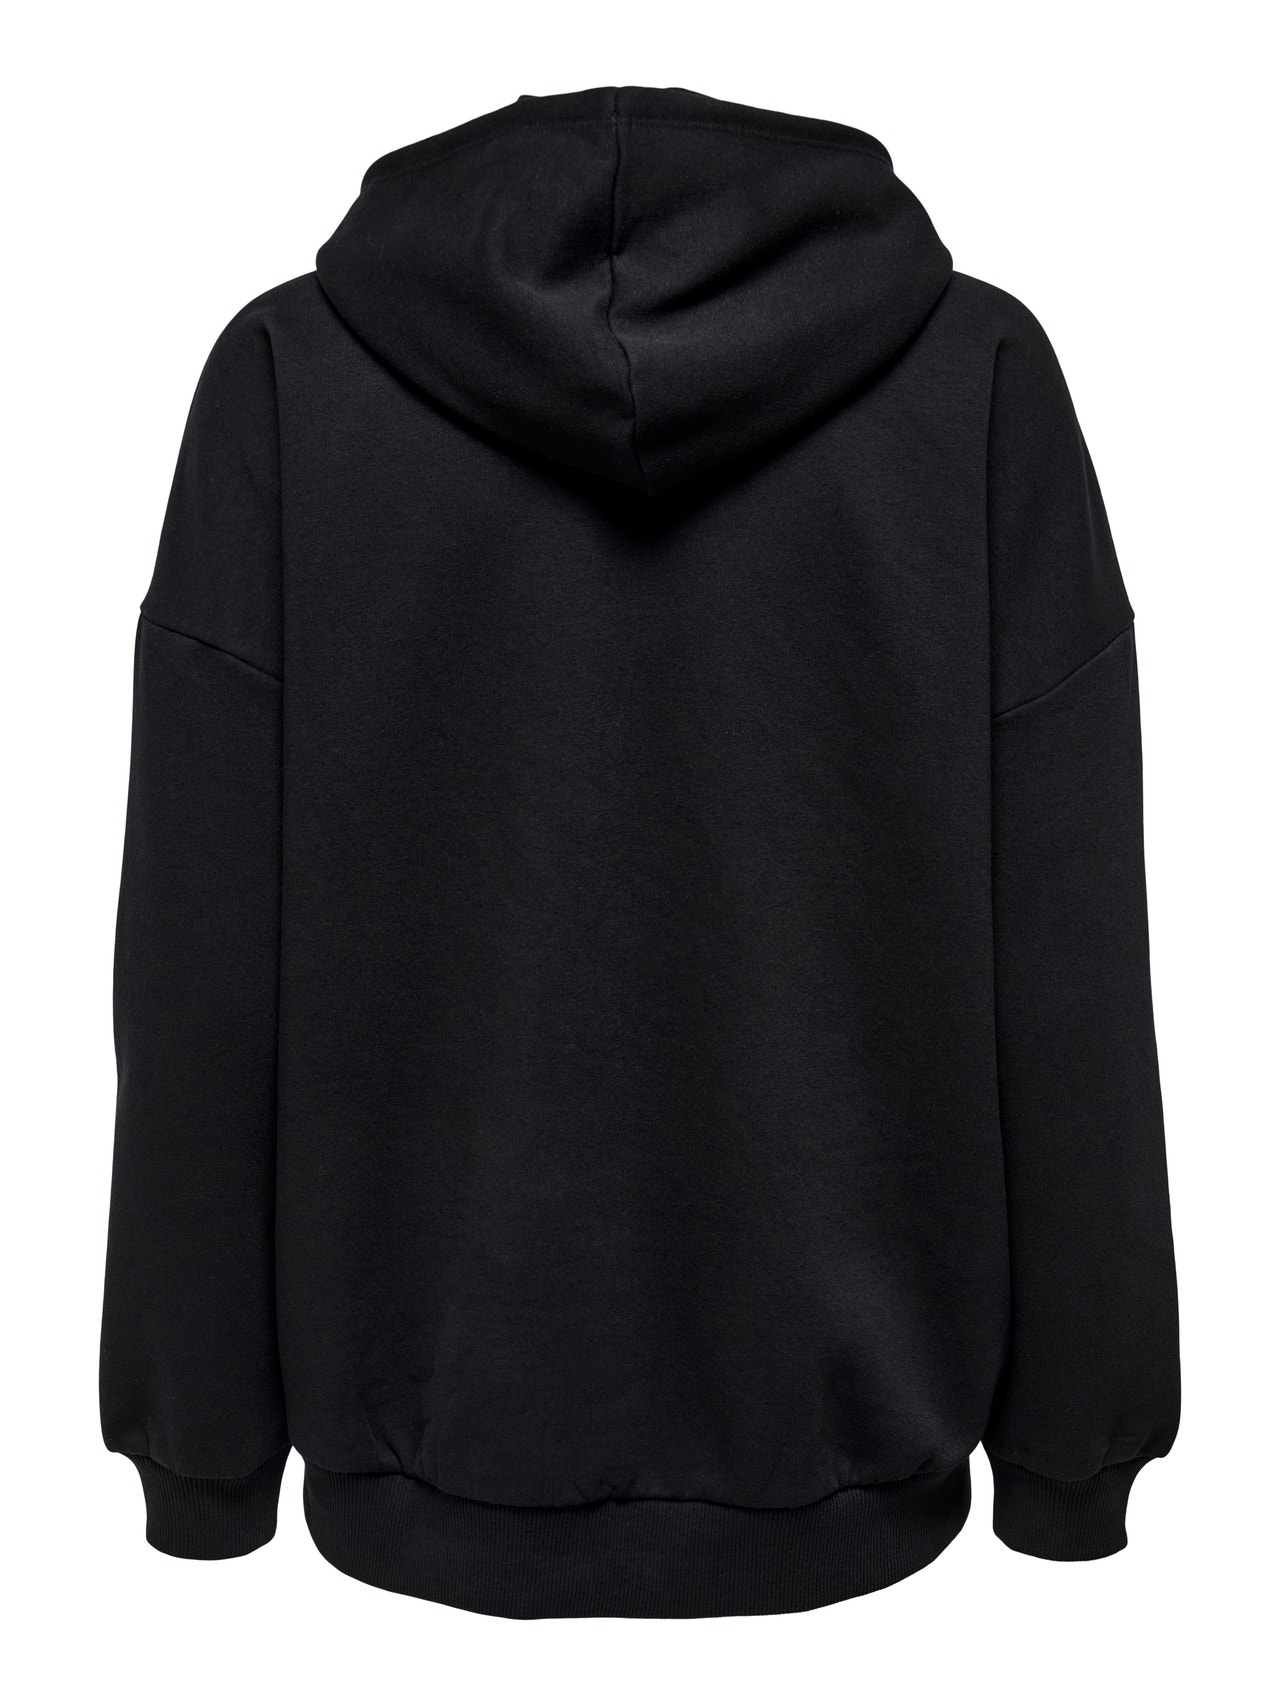 Oversized Printed Hoodie with 40% discount!